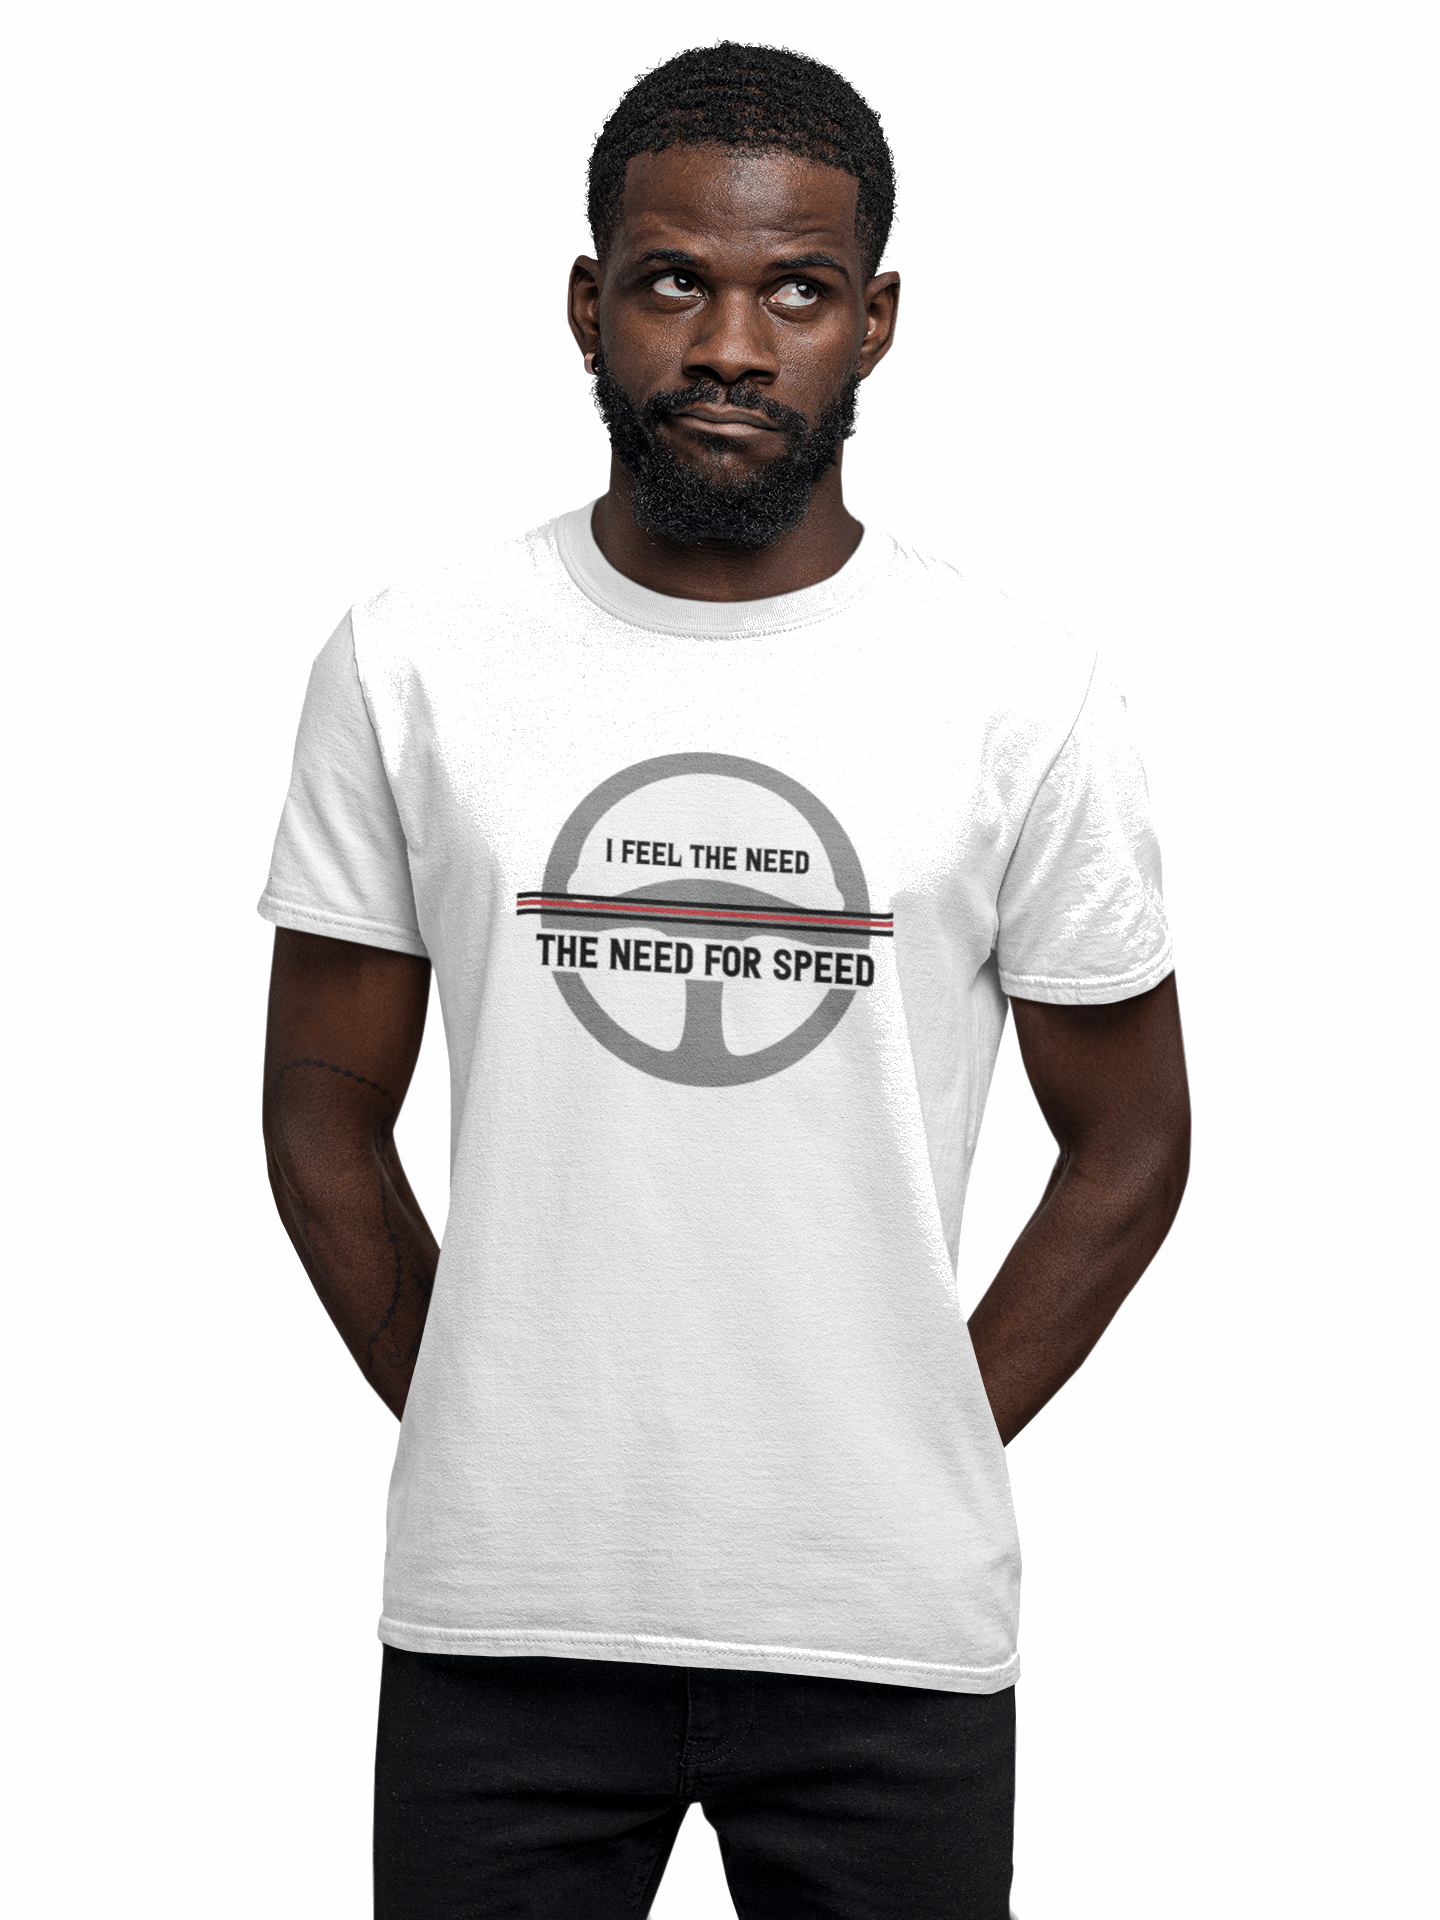 I feel the need for speed - Herren T-Shirt von TurboArts